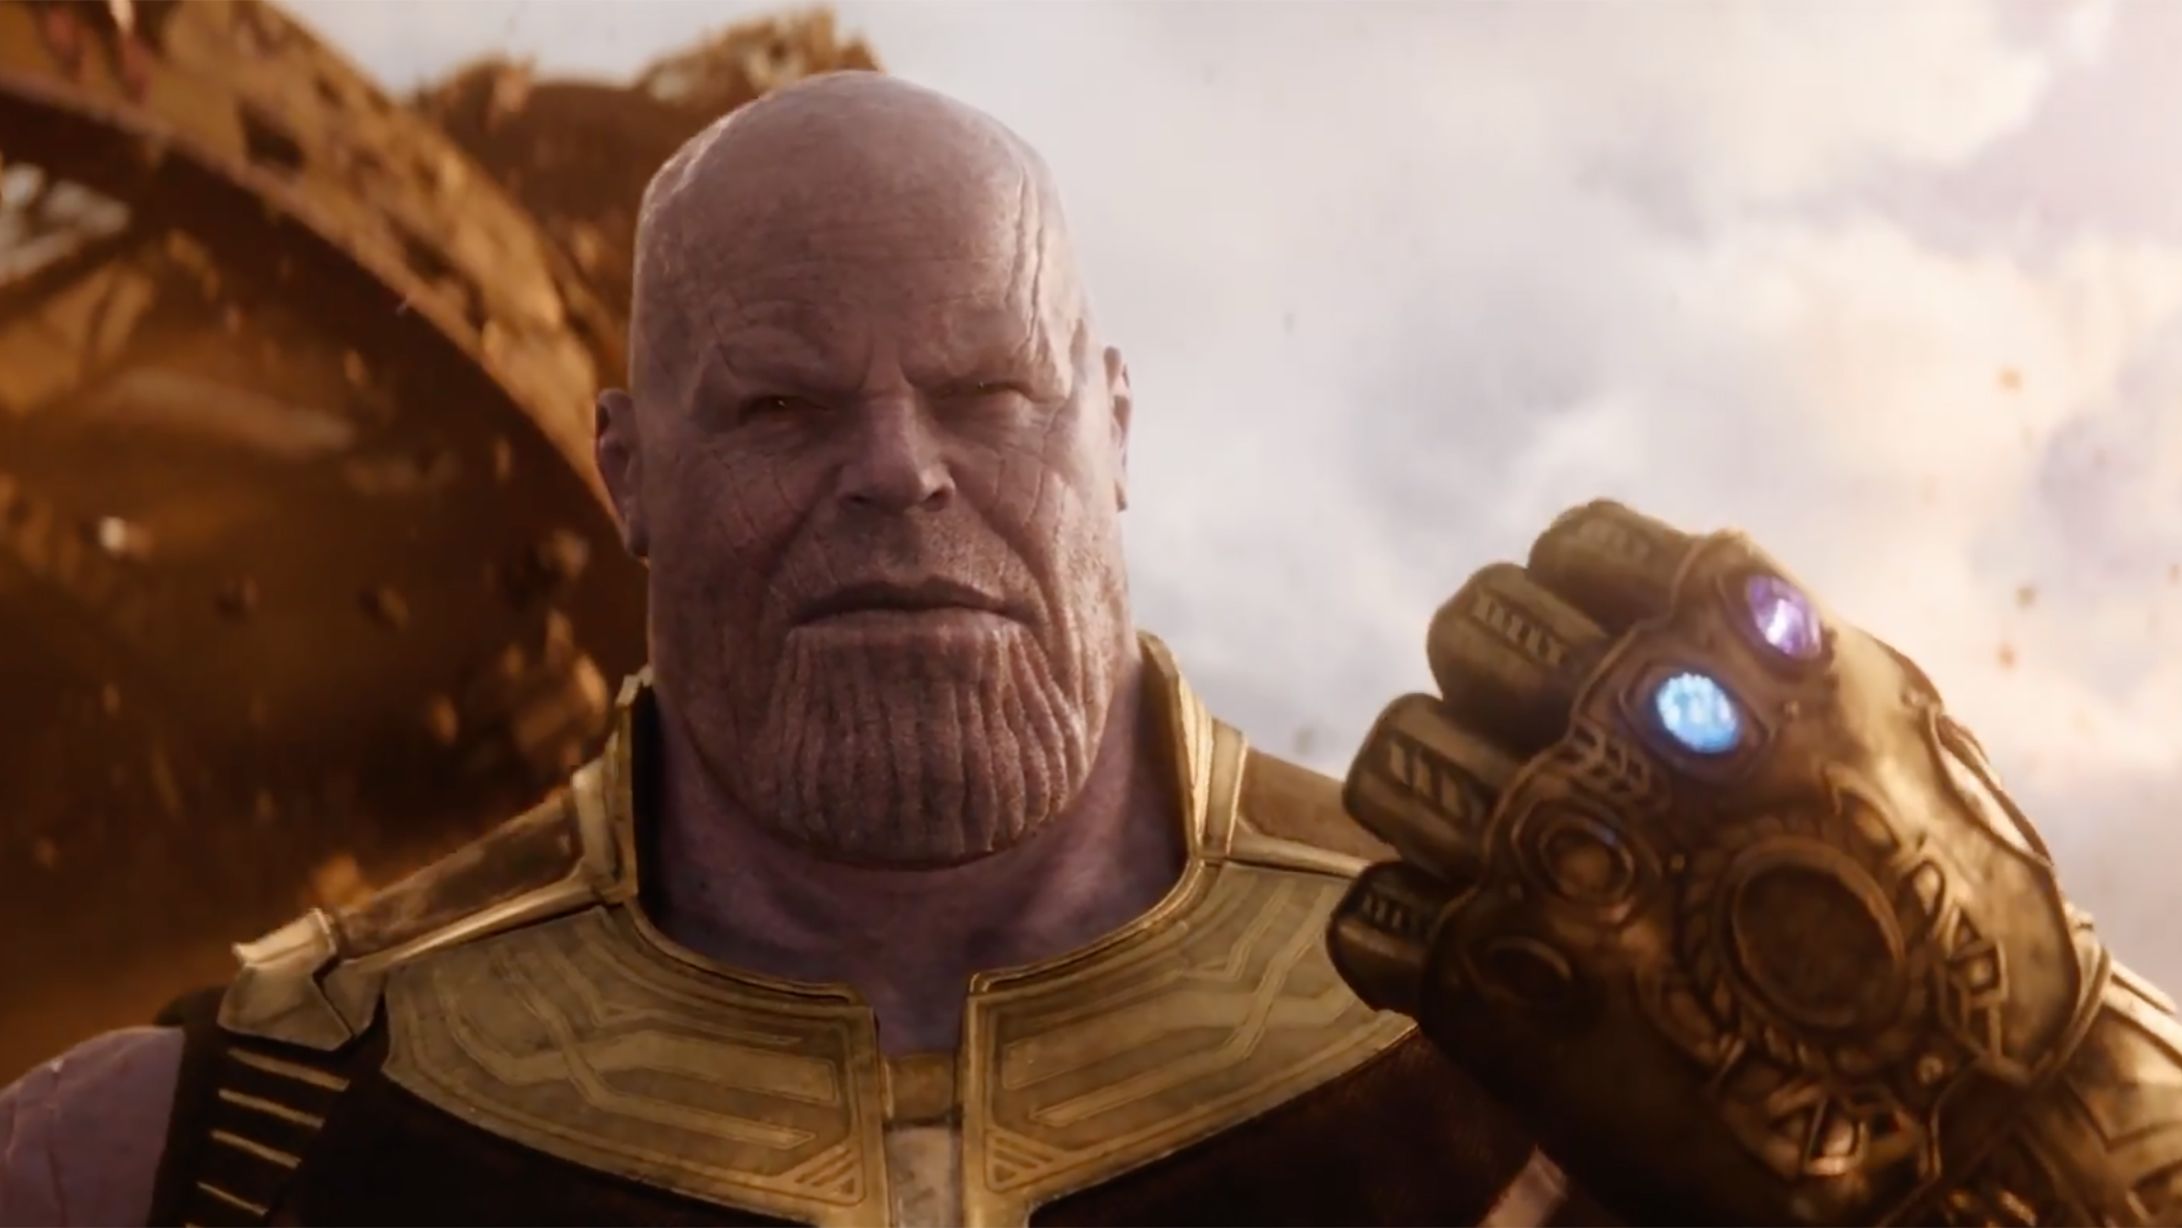 Avengers: Infinity War' review: Marvel's biggest movie brings everyone  together against Thanos, in a movie that amply delivers